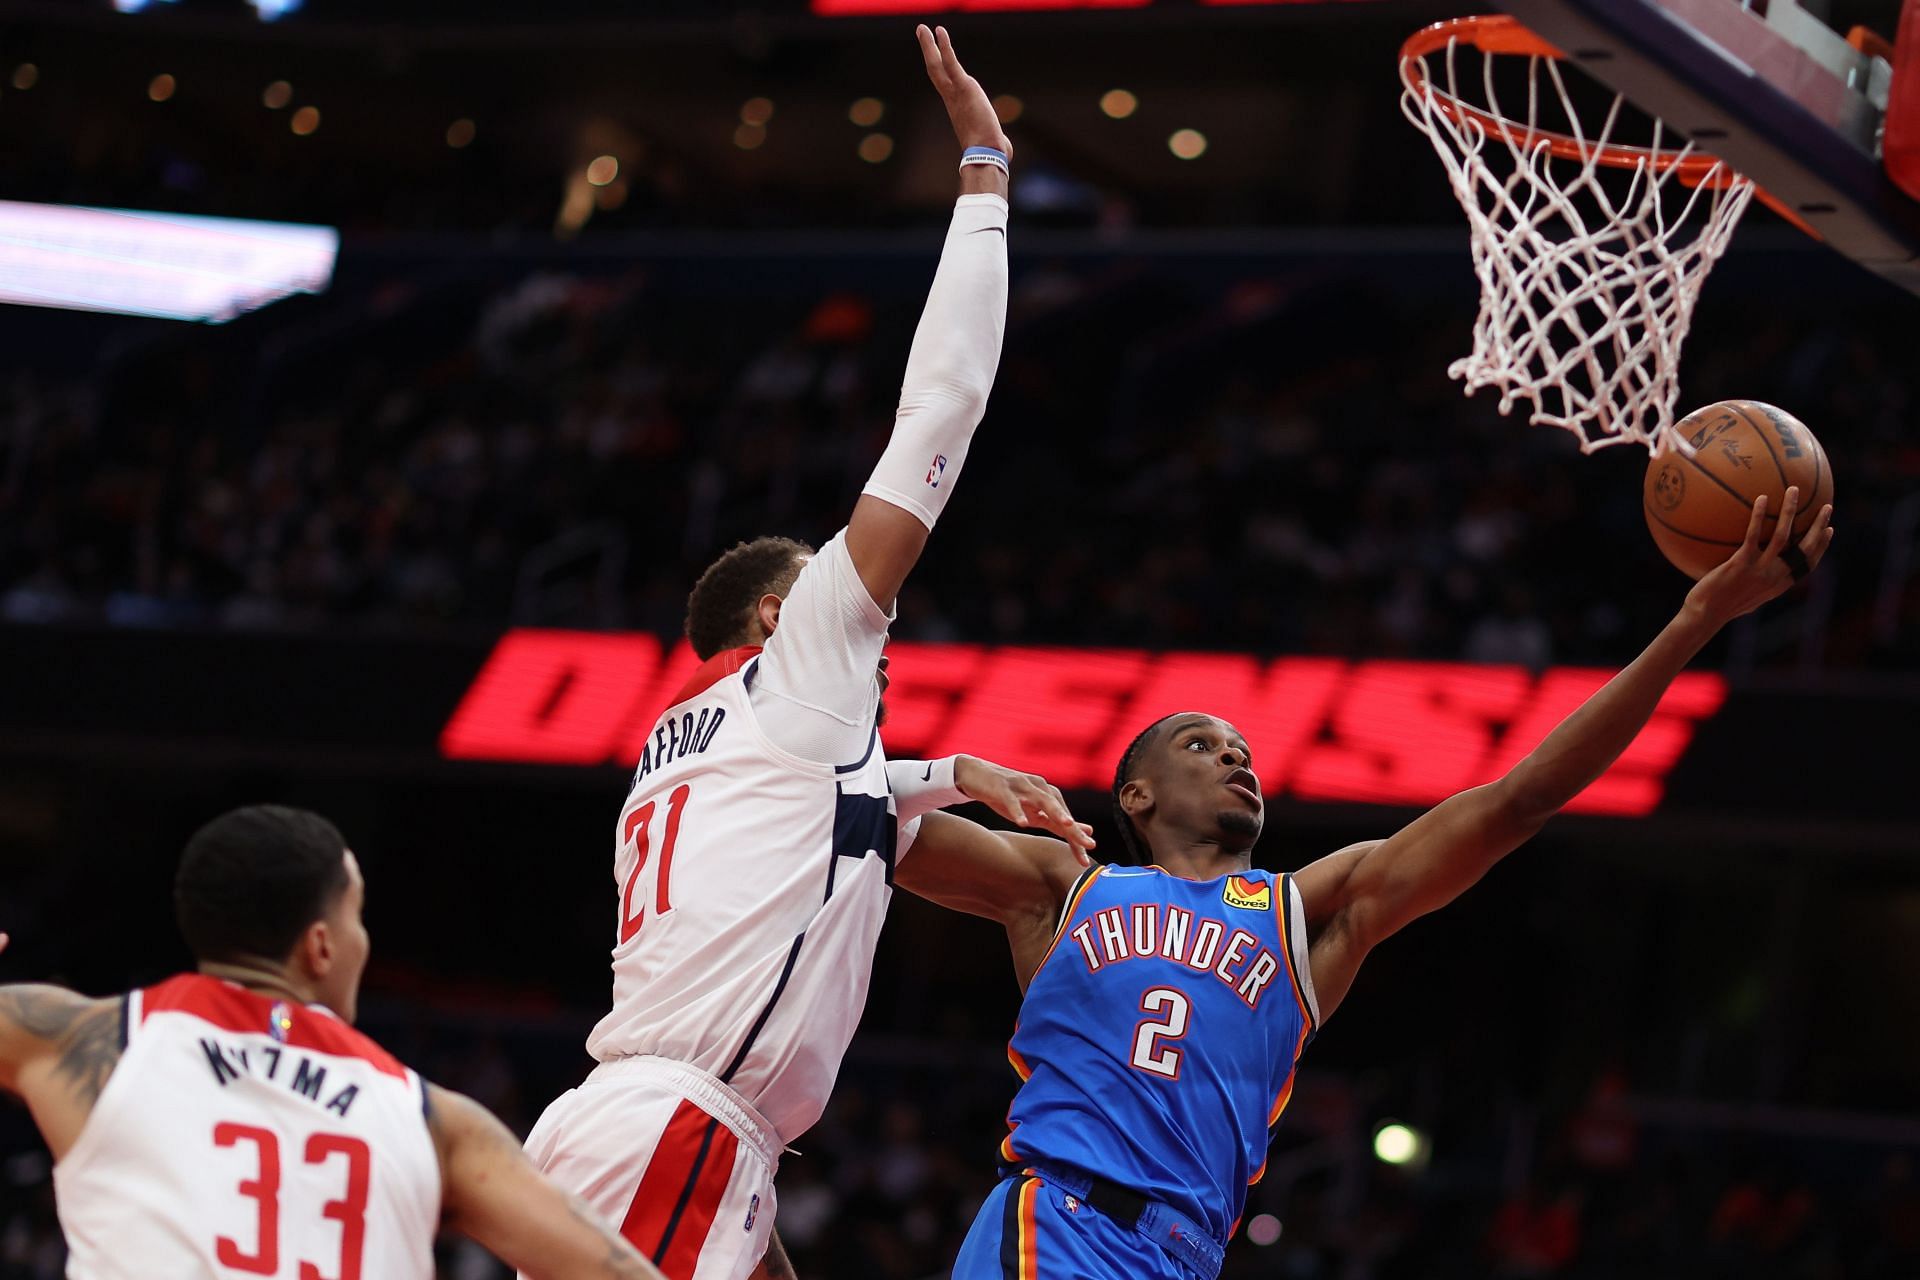 Despite fighting back, New Jersey Nets earn another defeat in 104-102 loss  to Oklahoma City Thunder – New York Daily News